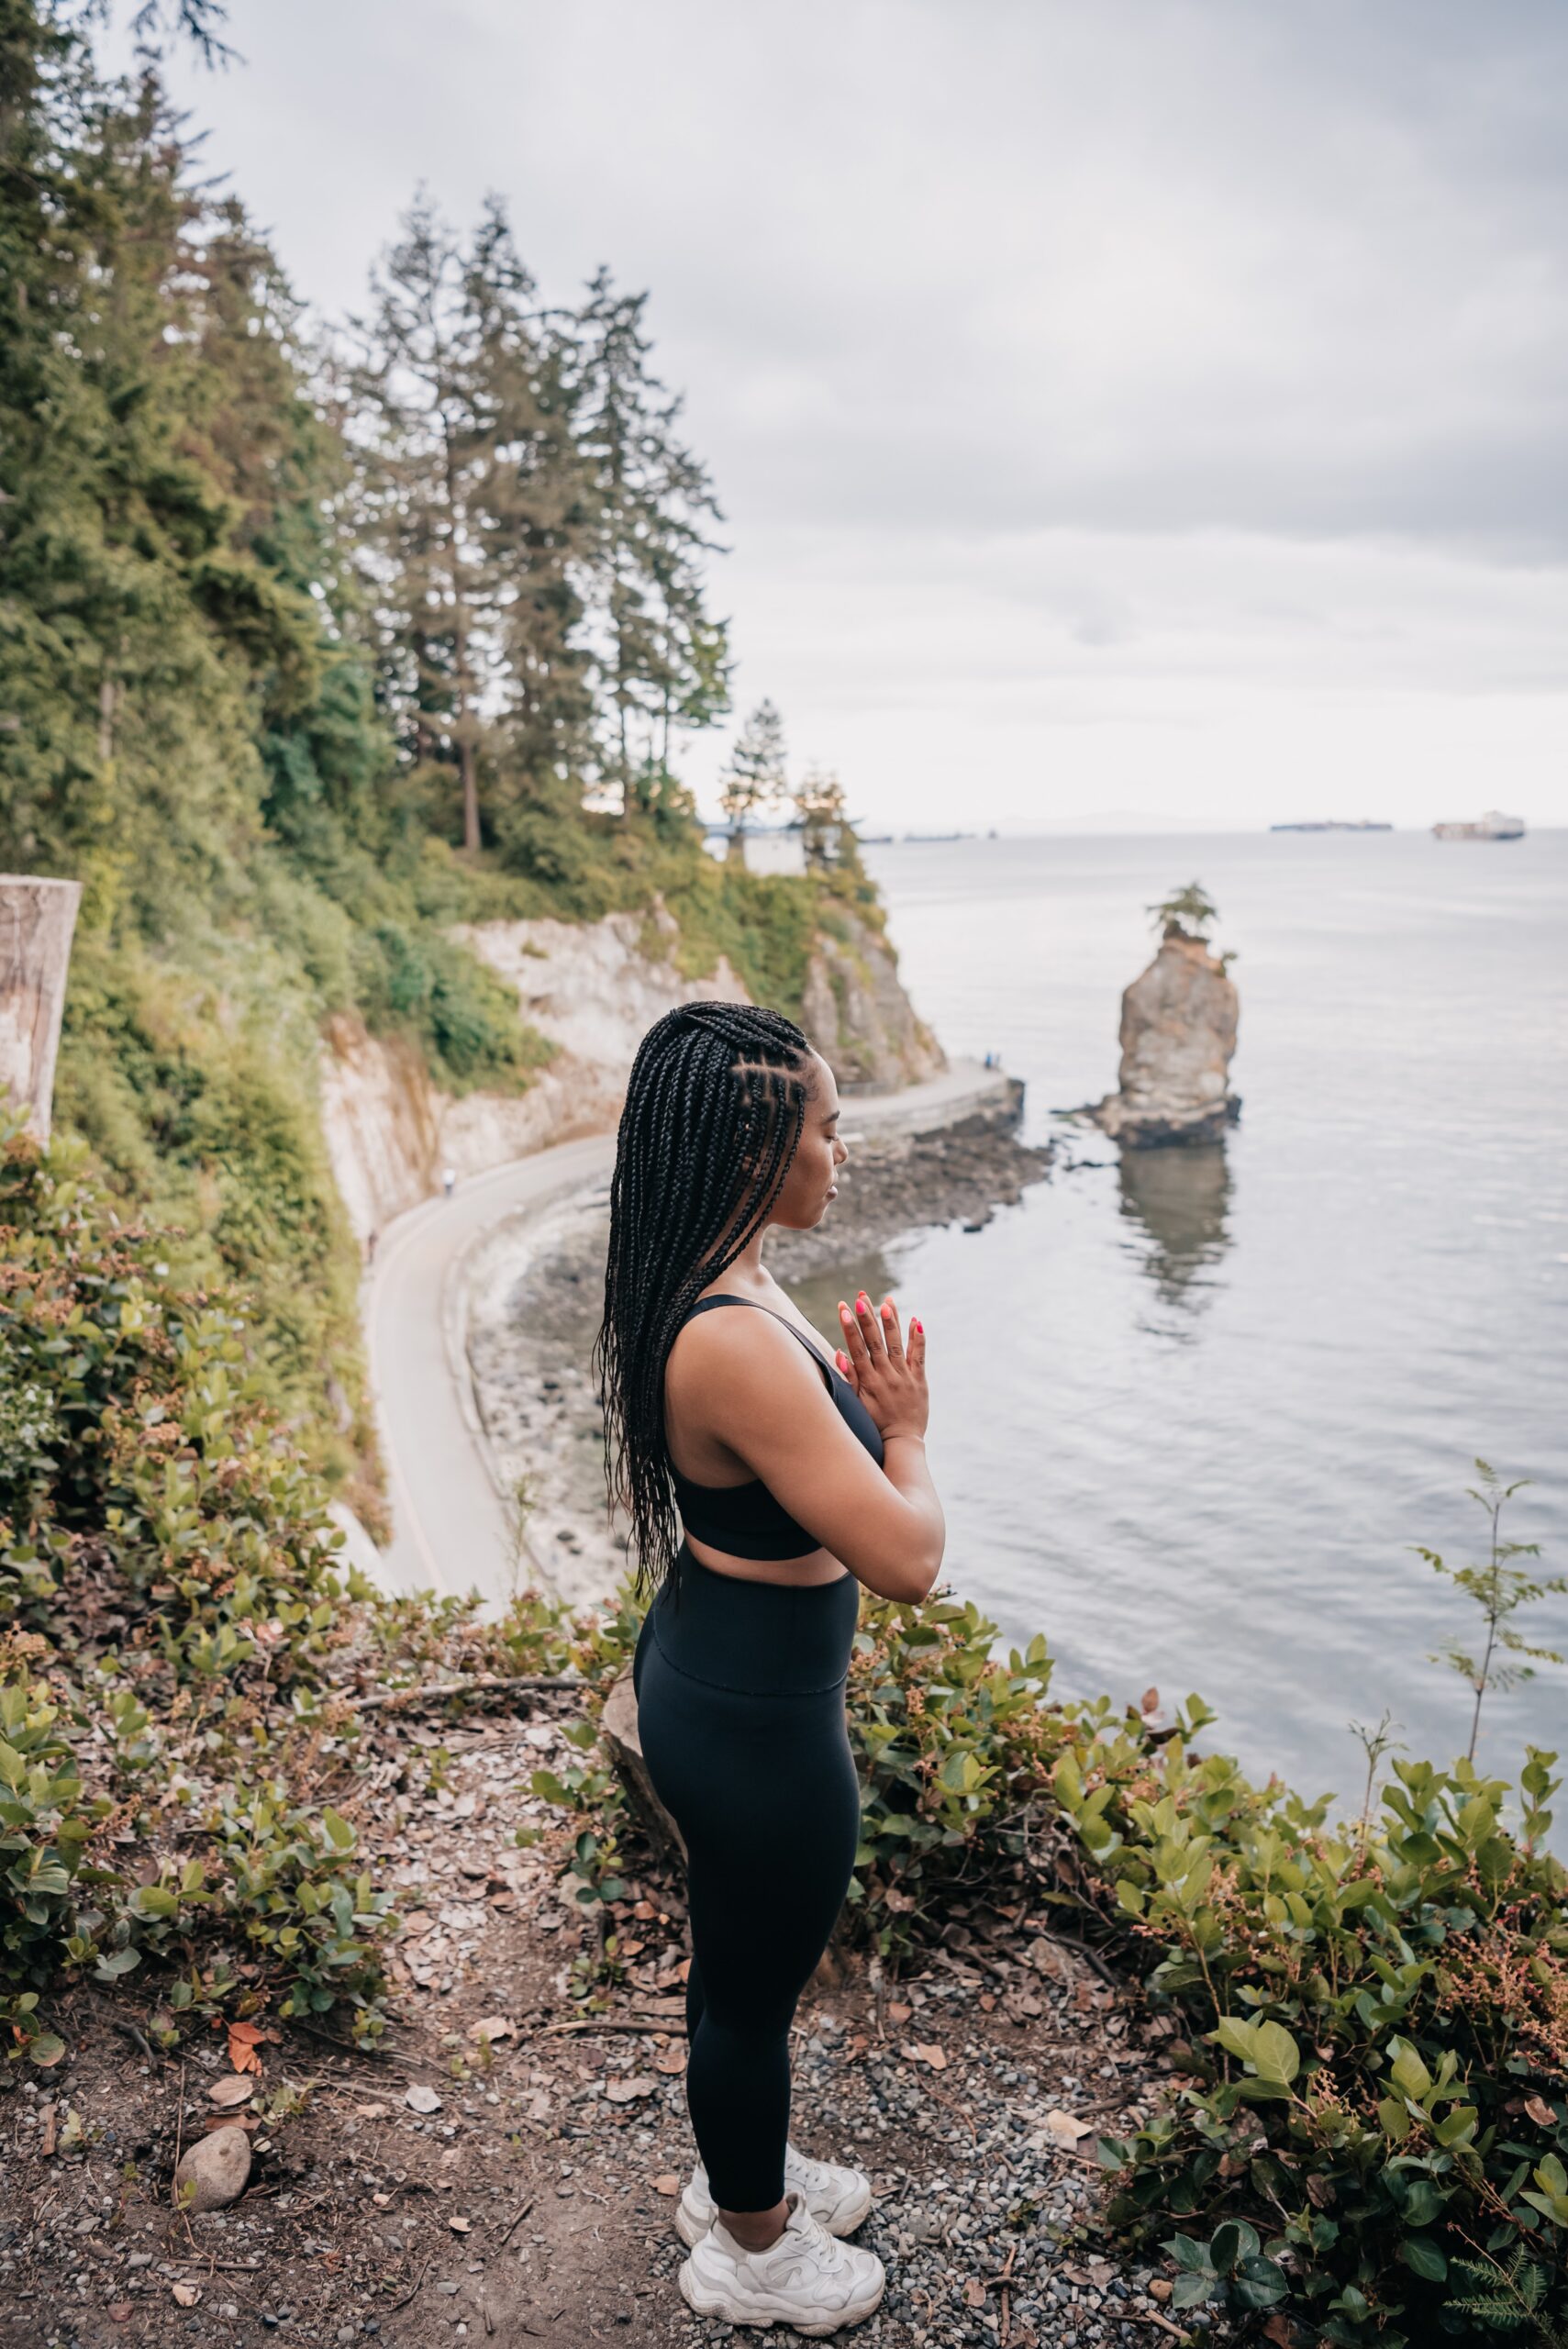 Woman standing outside in a meditative state, absorbing the nature around her.